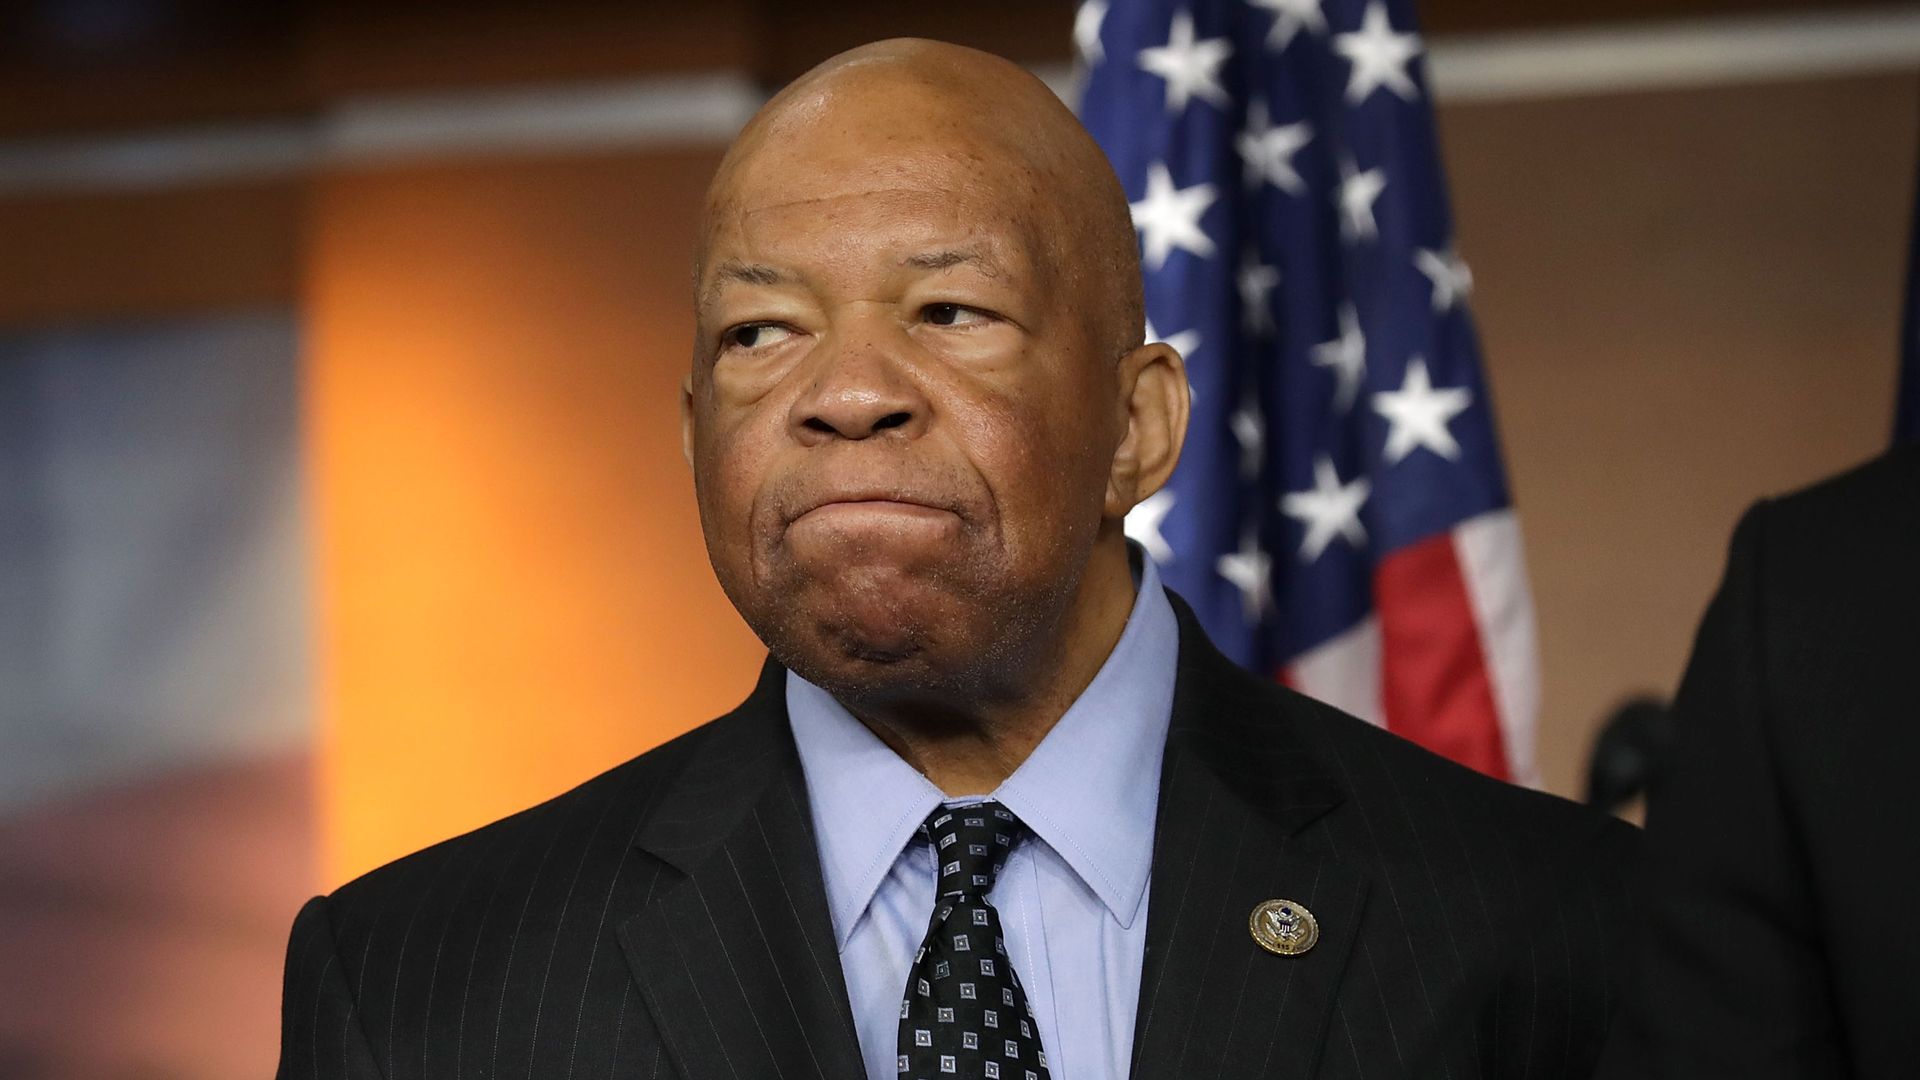 House Oversight and Government Reform Committee ranking member Rep. Elijah Cummings.